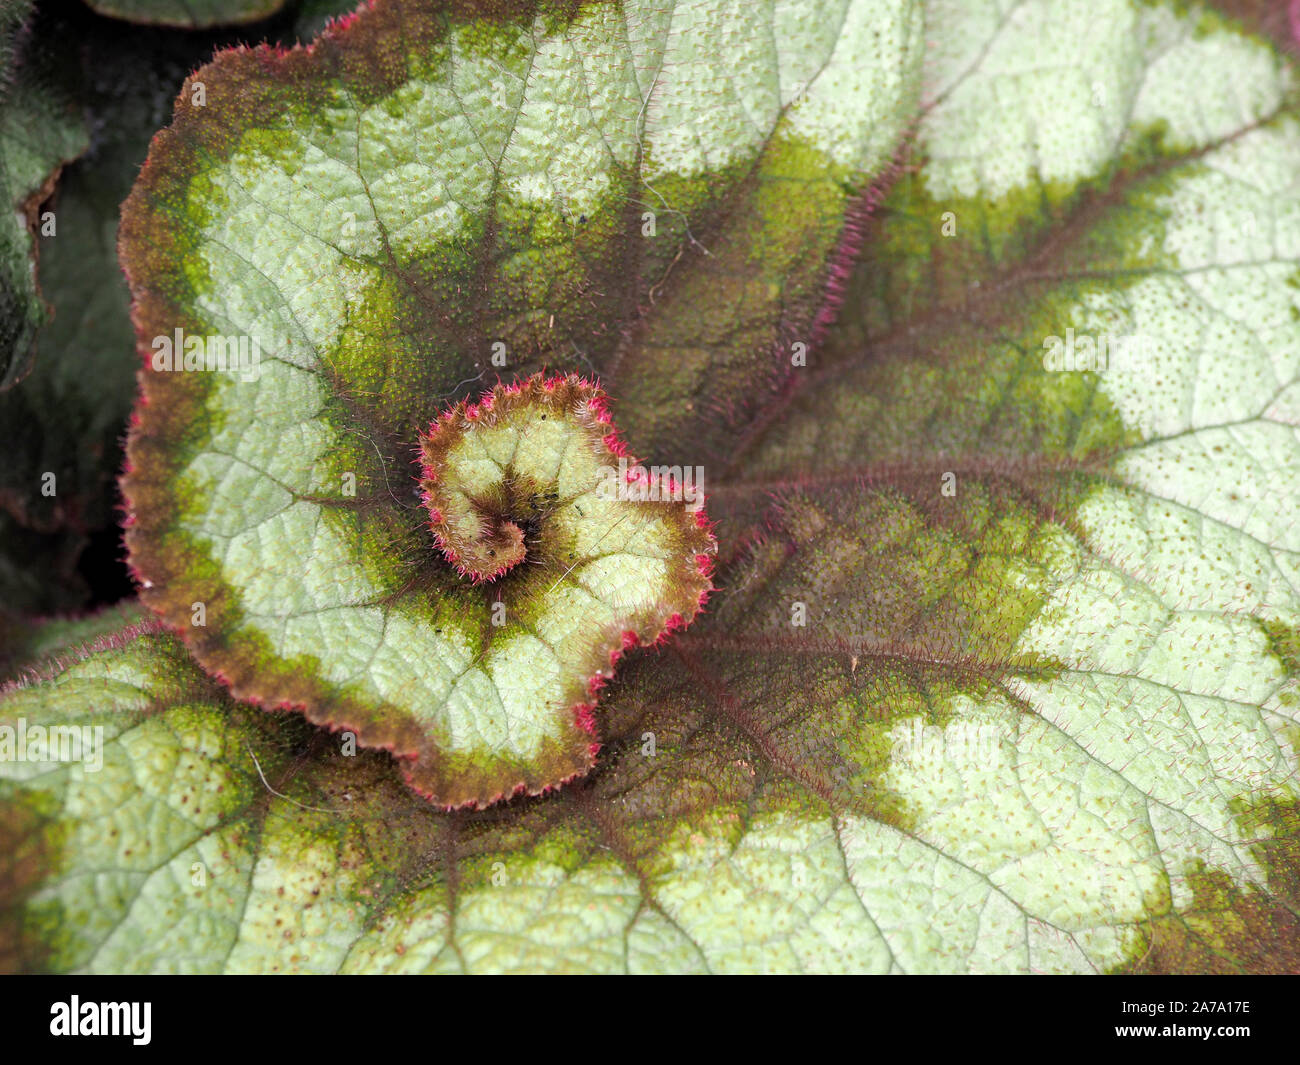 Begonia Rex - painted-leaf begonias or fancy-leaf begonias - with interesting coiled variegated leaf in green grey and reddish pink Stock Photo